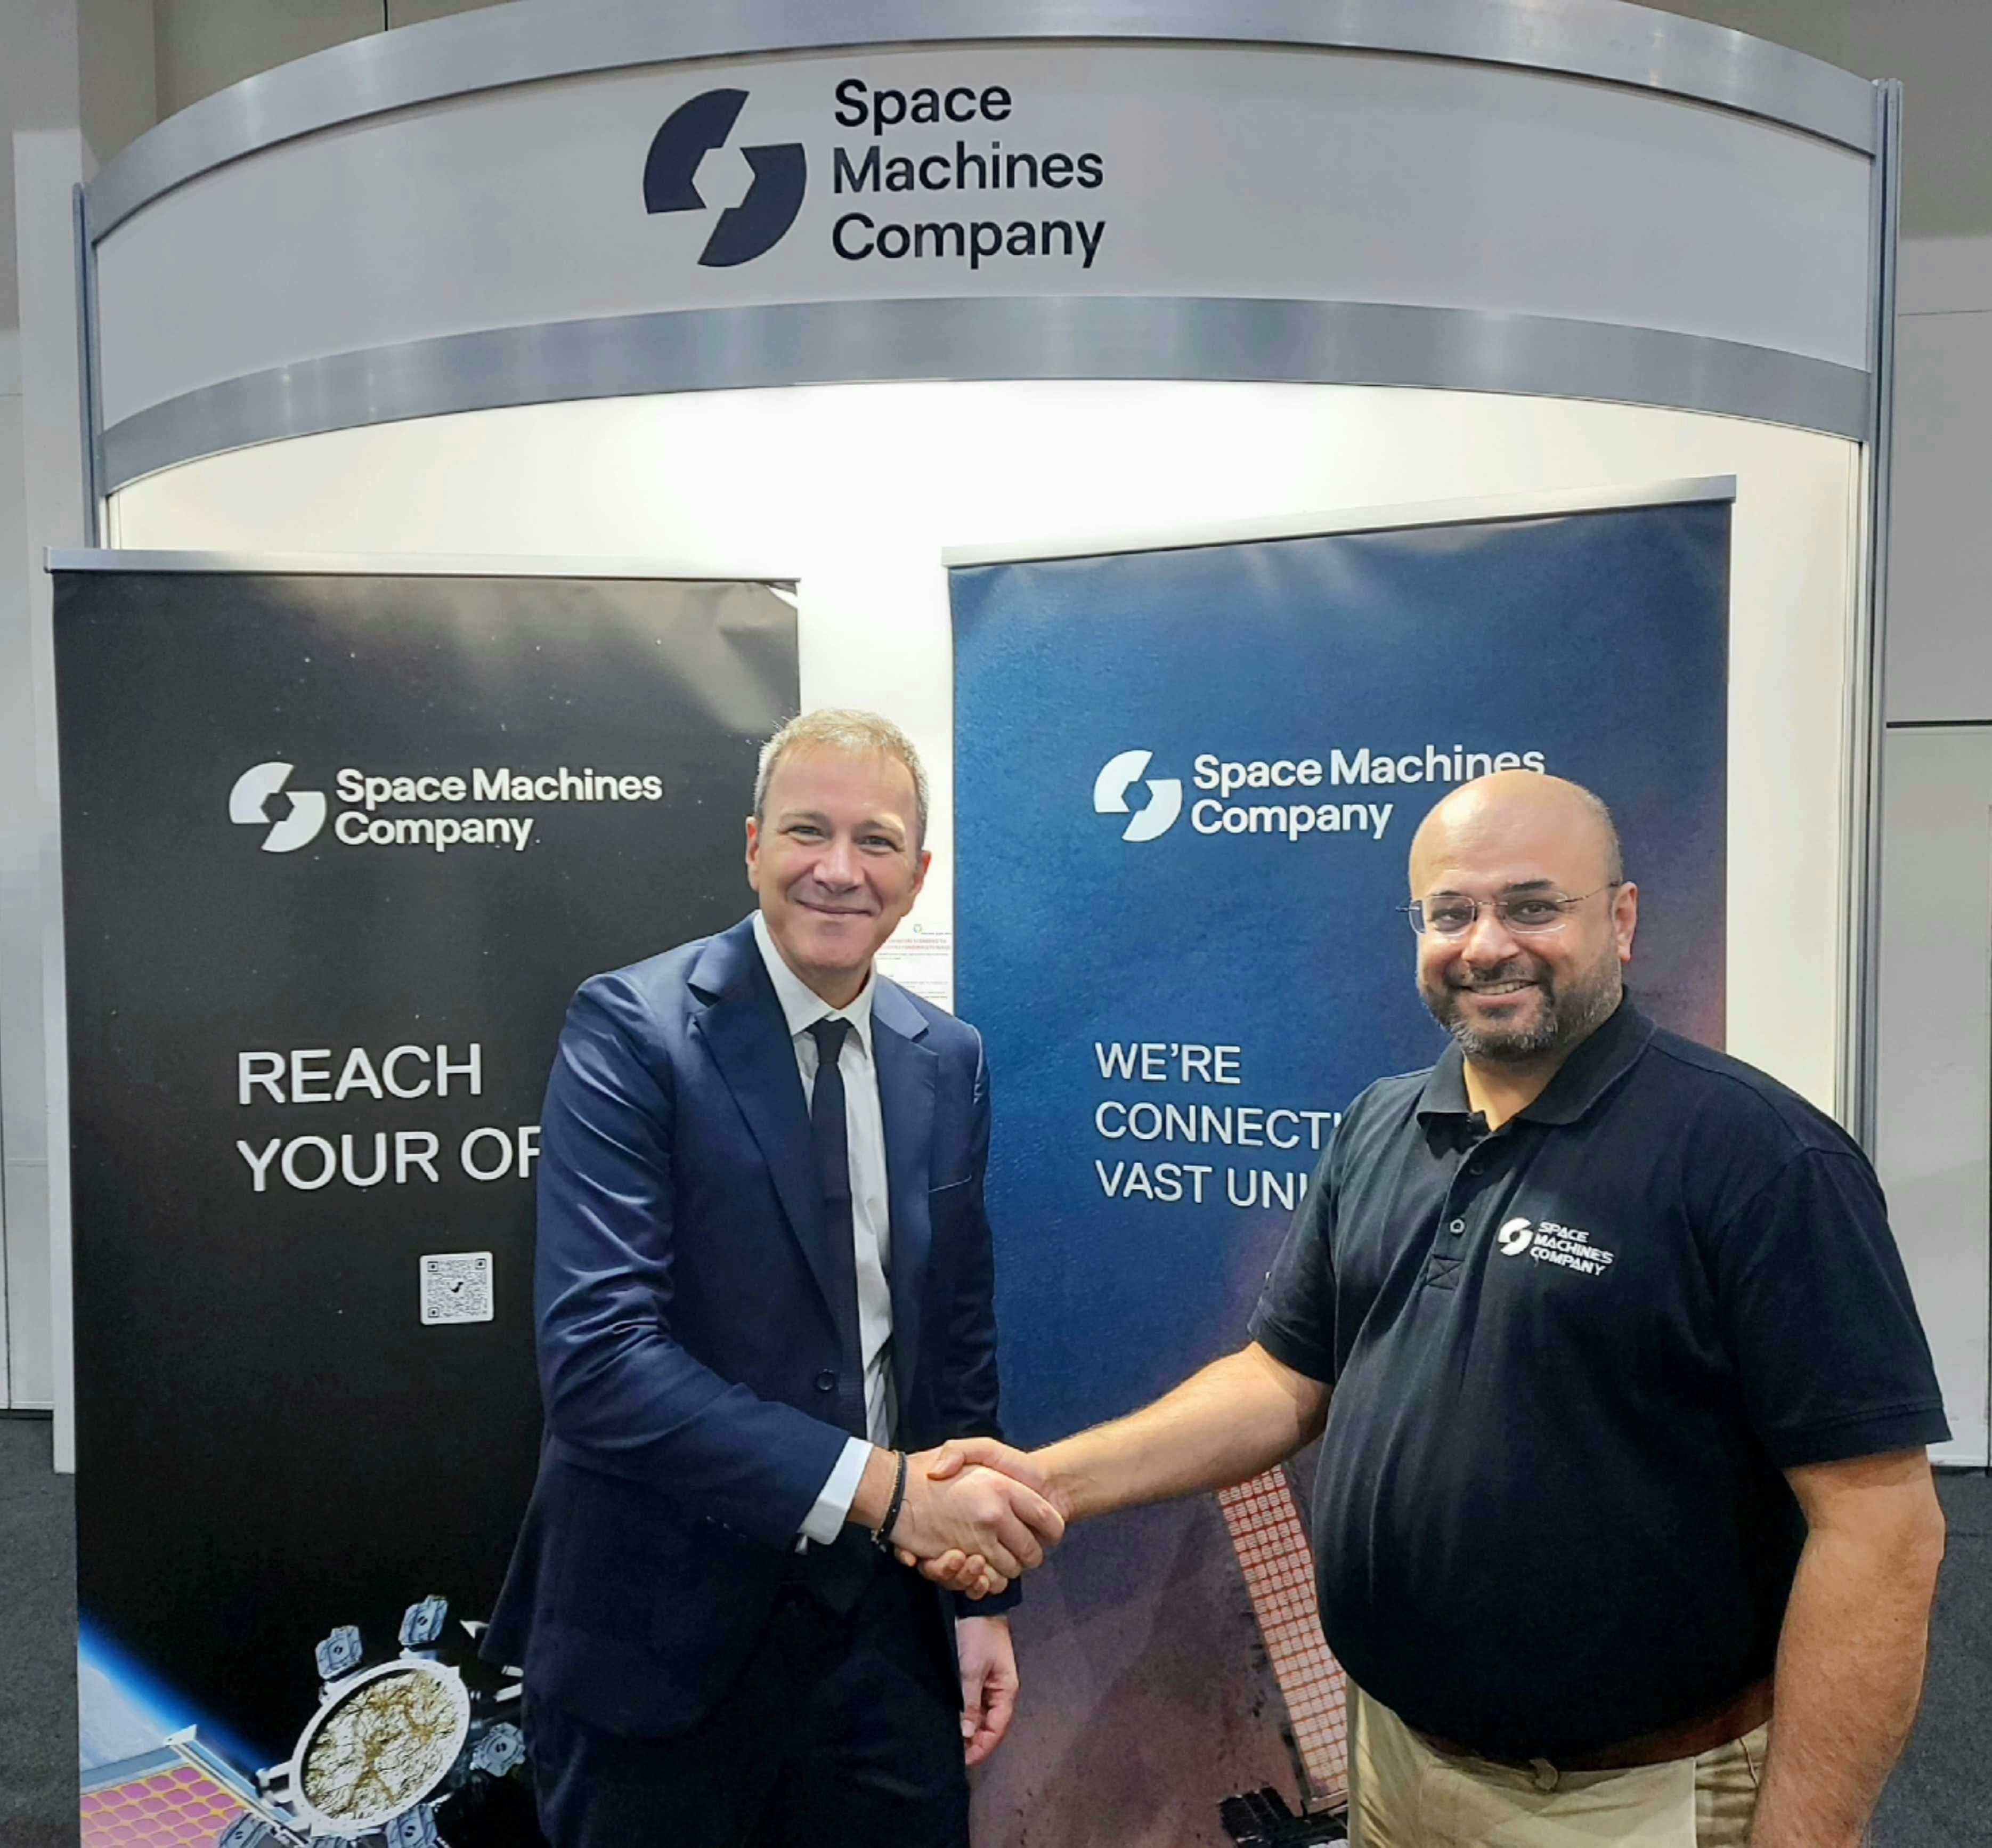 Space Machines Company partners with Arianespace to explore In-space transportation and logistics services